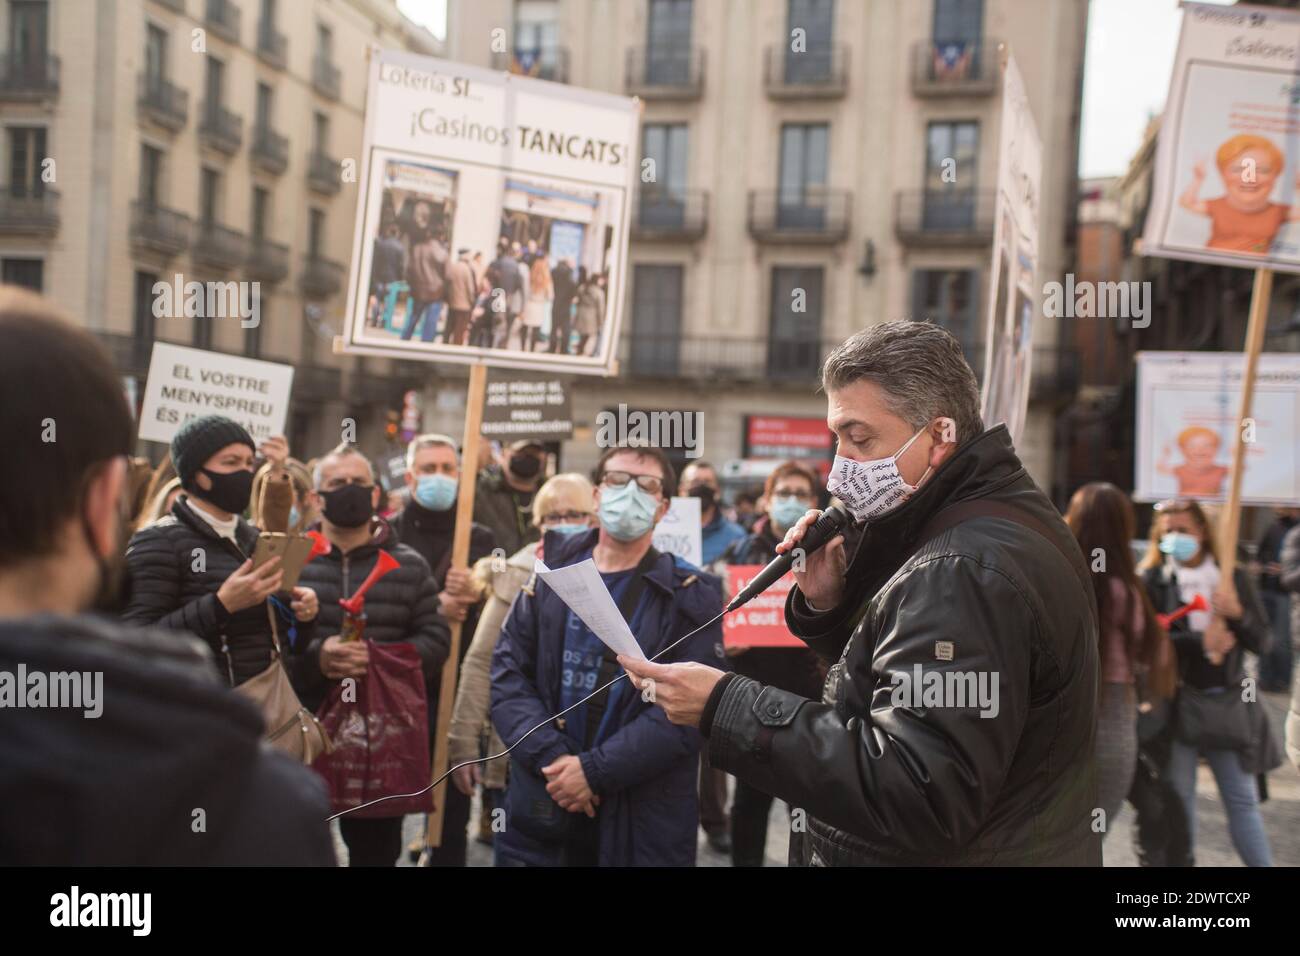 Barcelona, Catalonia, Spain. 23rd Dec, 2020. Protester is seen speaking to demonstrators.Workers of Bingo and Casino of Catalonia protest in Barcelona this Wednesday, December 23, for the only daytime economic activity that remains closed due to the restrictions of the pandemic. Credit: ZUMA Press, Inc./Alamy Live News Stock Photo